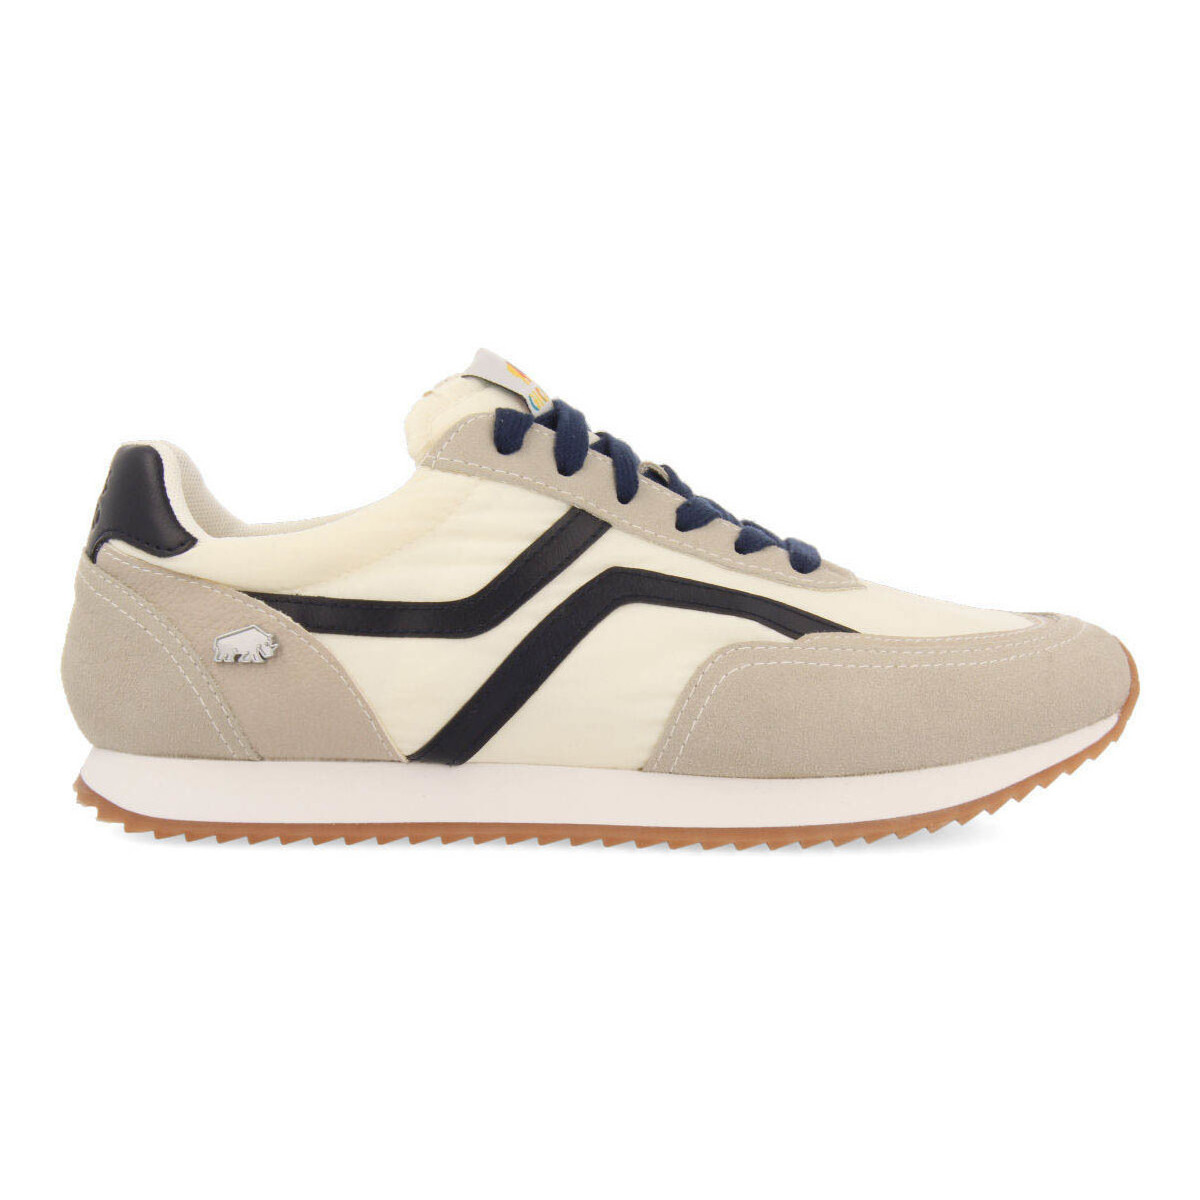 Chaussures Homme Baskets mode Gioseppo anould Beige